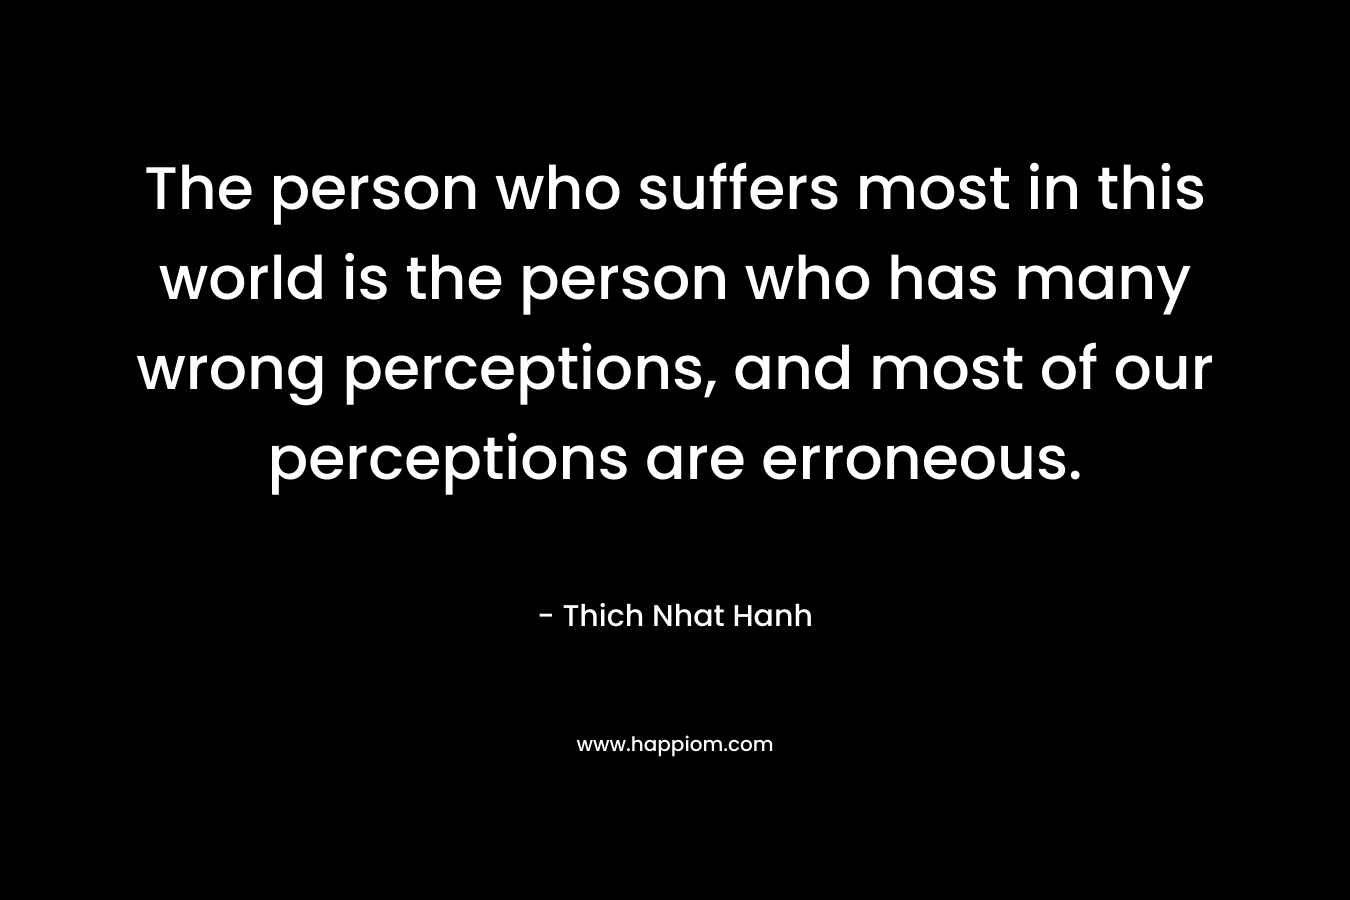 The person who suffers most in this world is the person who has many wrong perceptions, and most of our perceptions are erroneous.